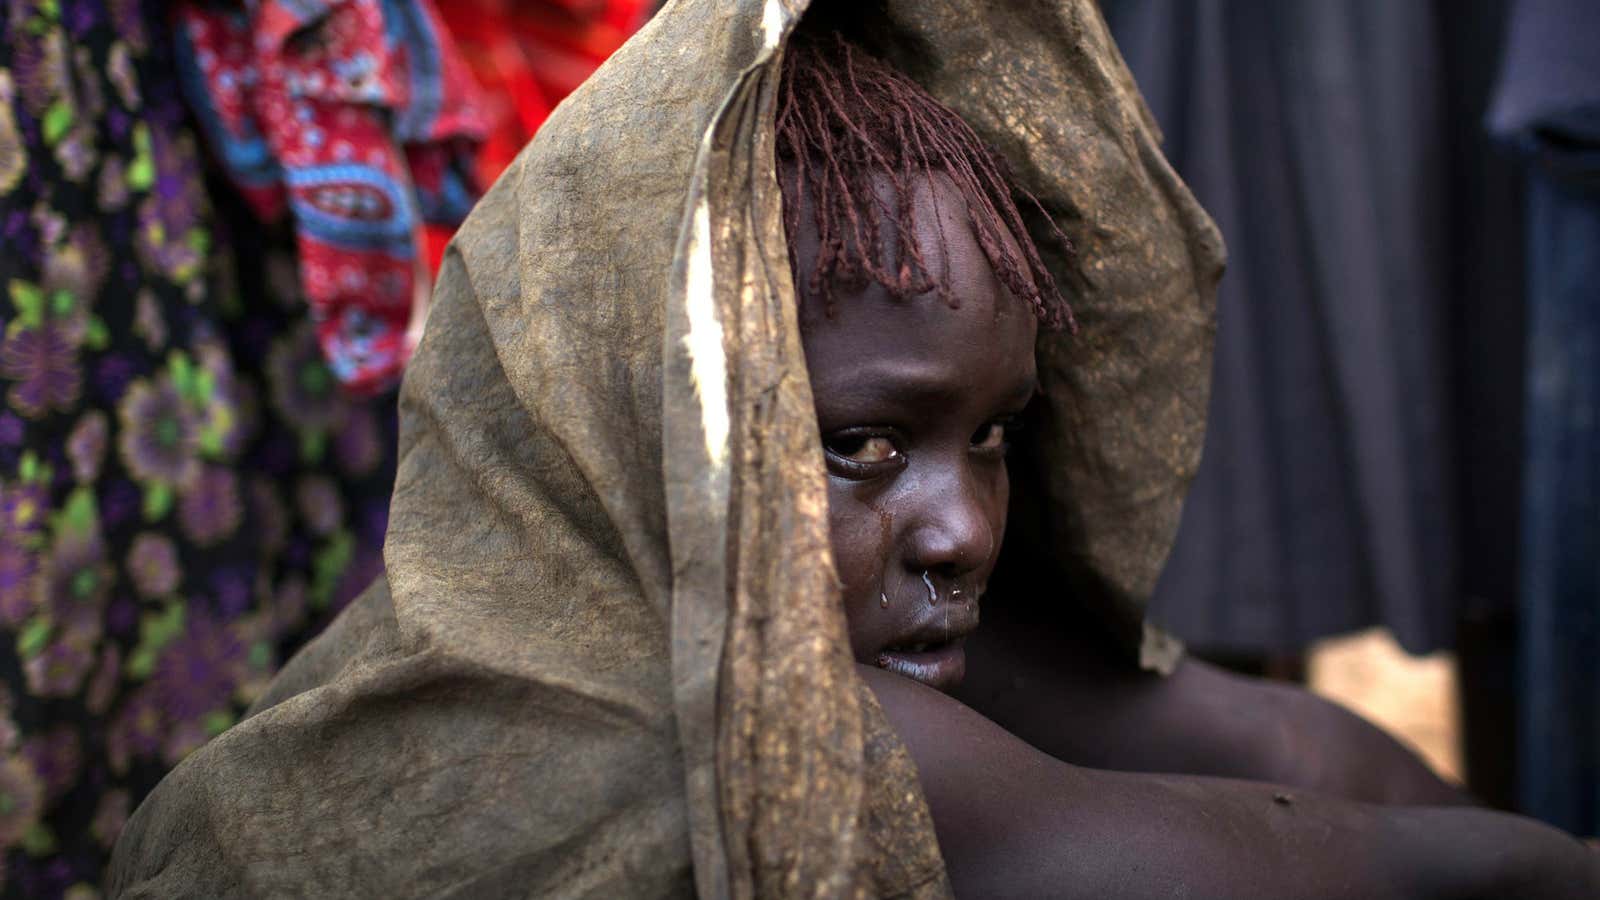 A girl in Baringo County Kenya cries after being circumcised.